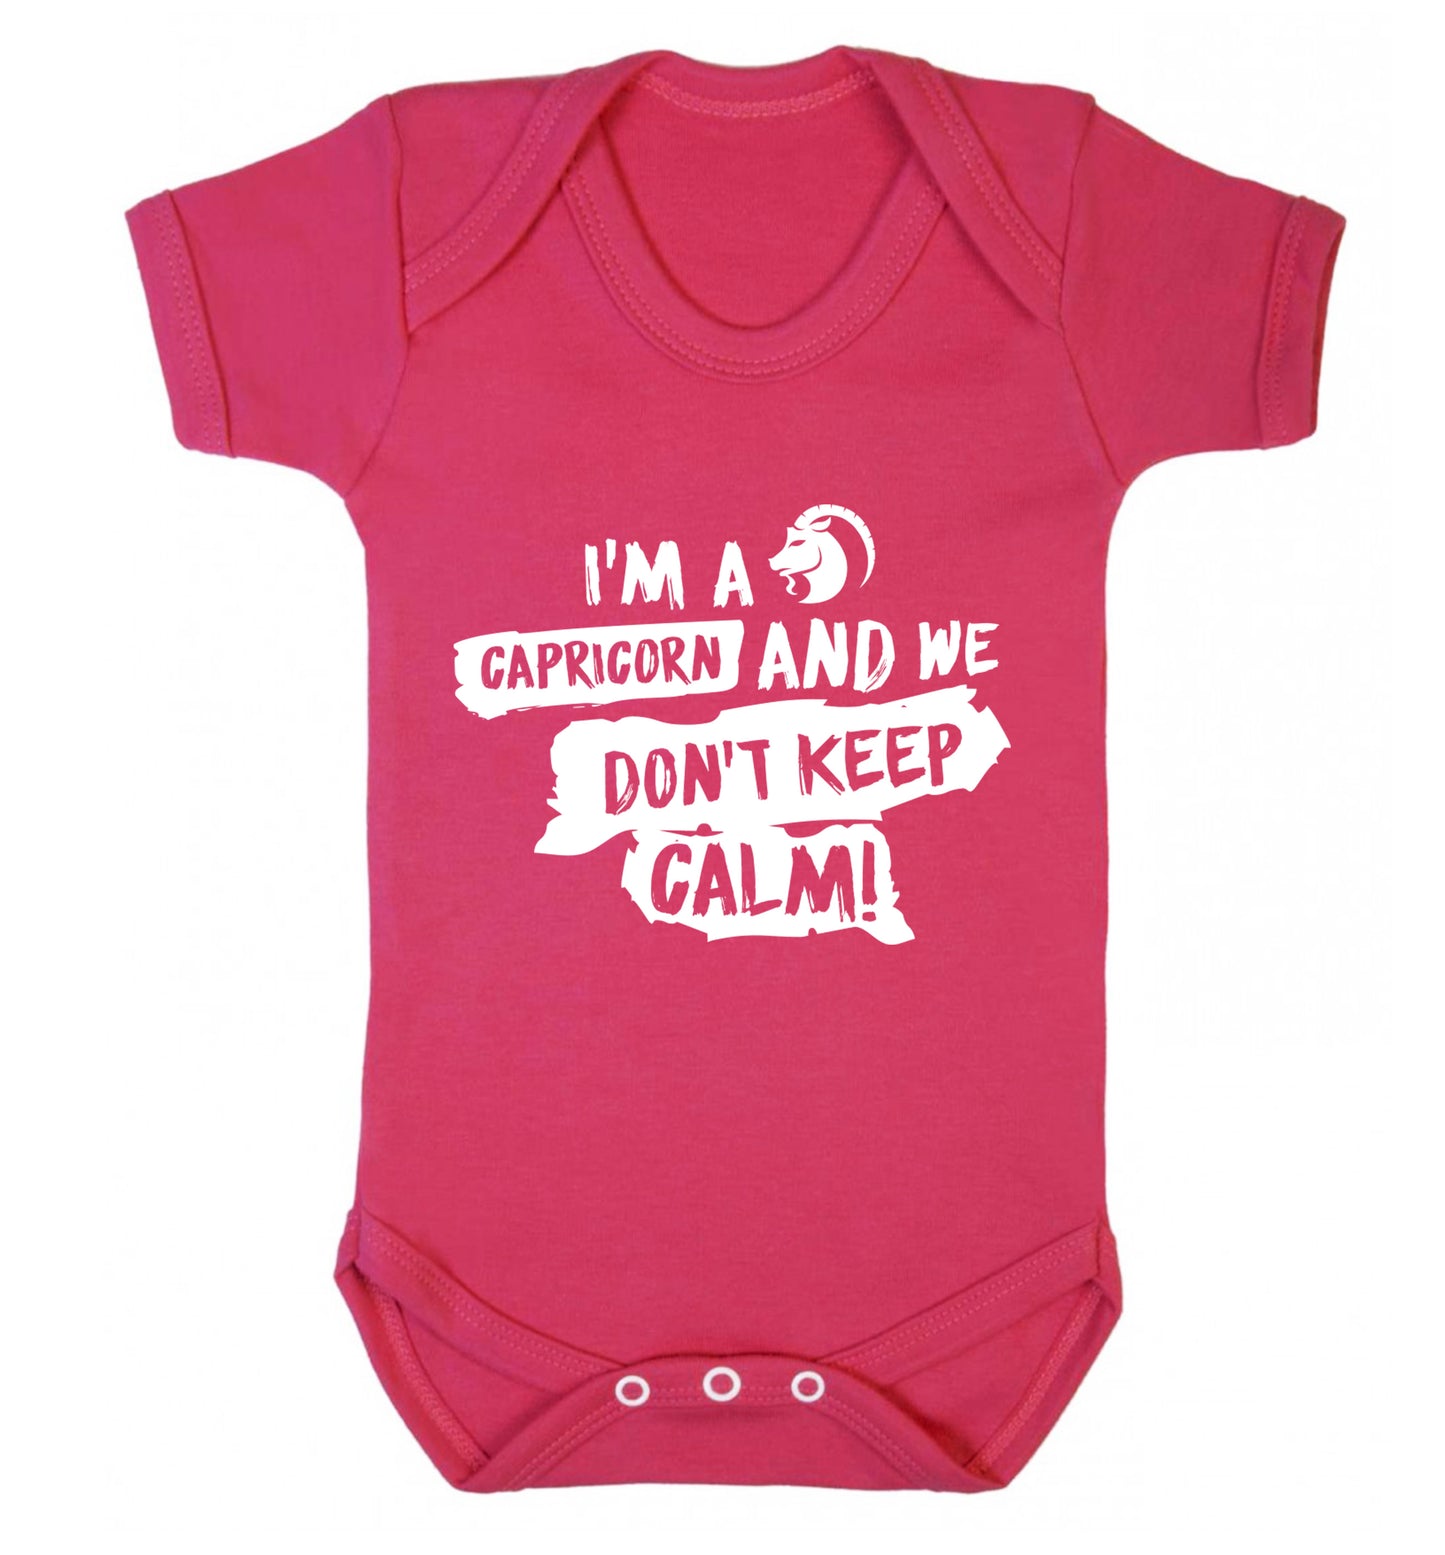 I'm a capricorn and we don't keep calm Baby Vest dark pink 18-24 months